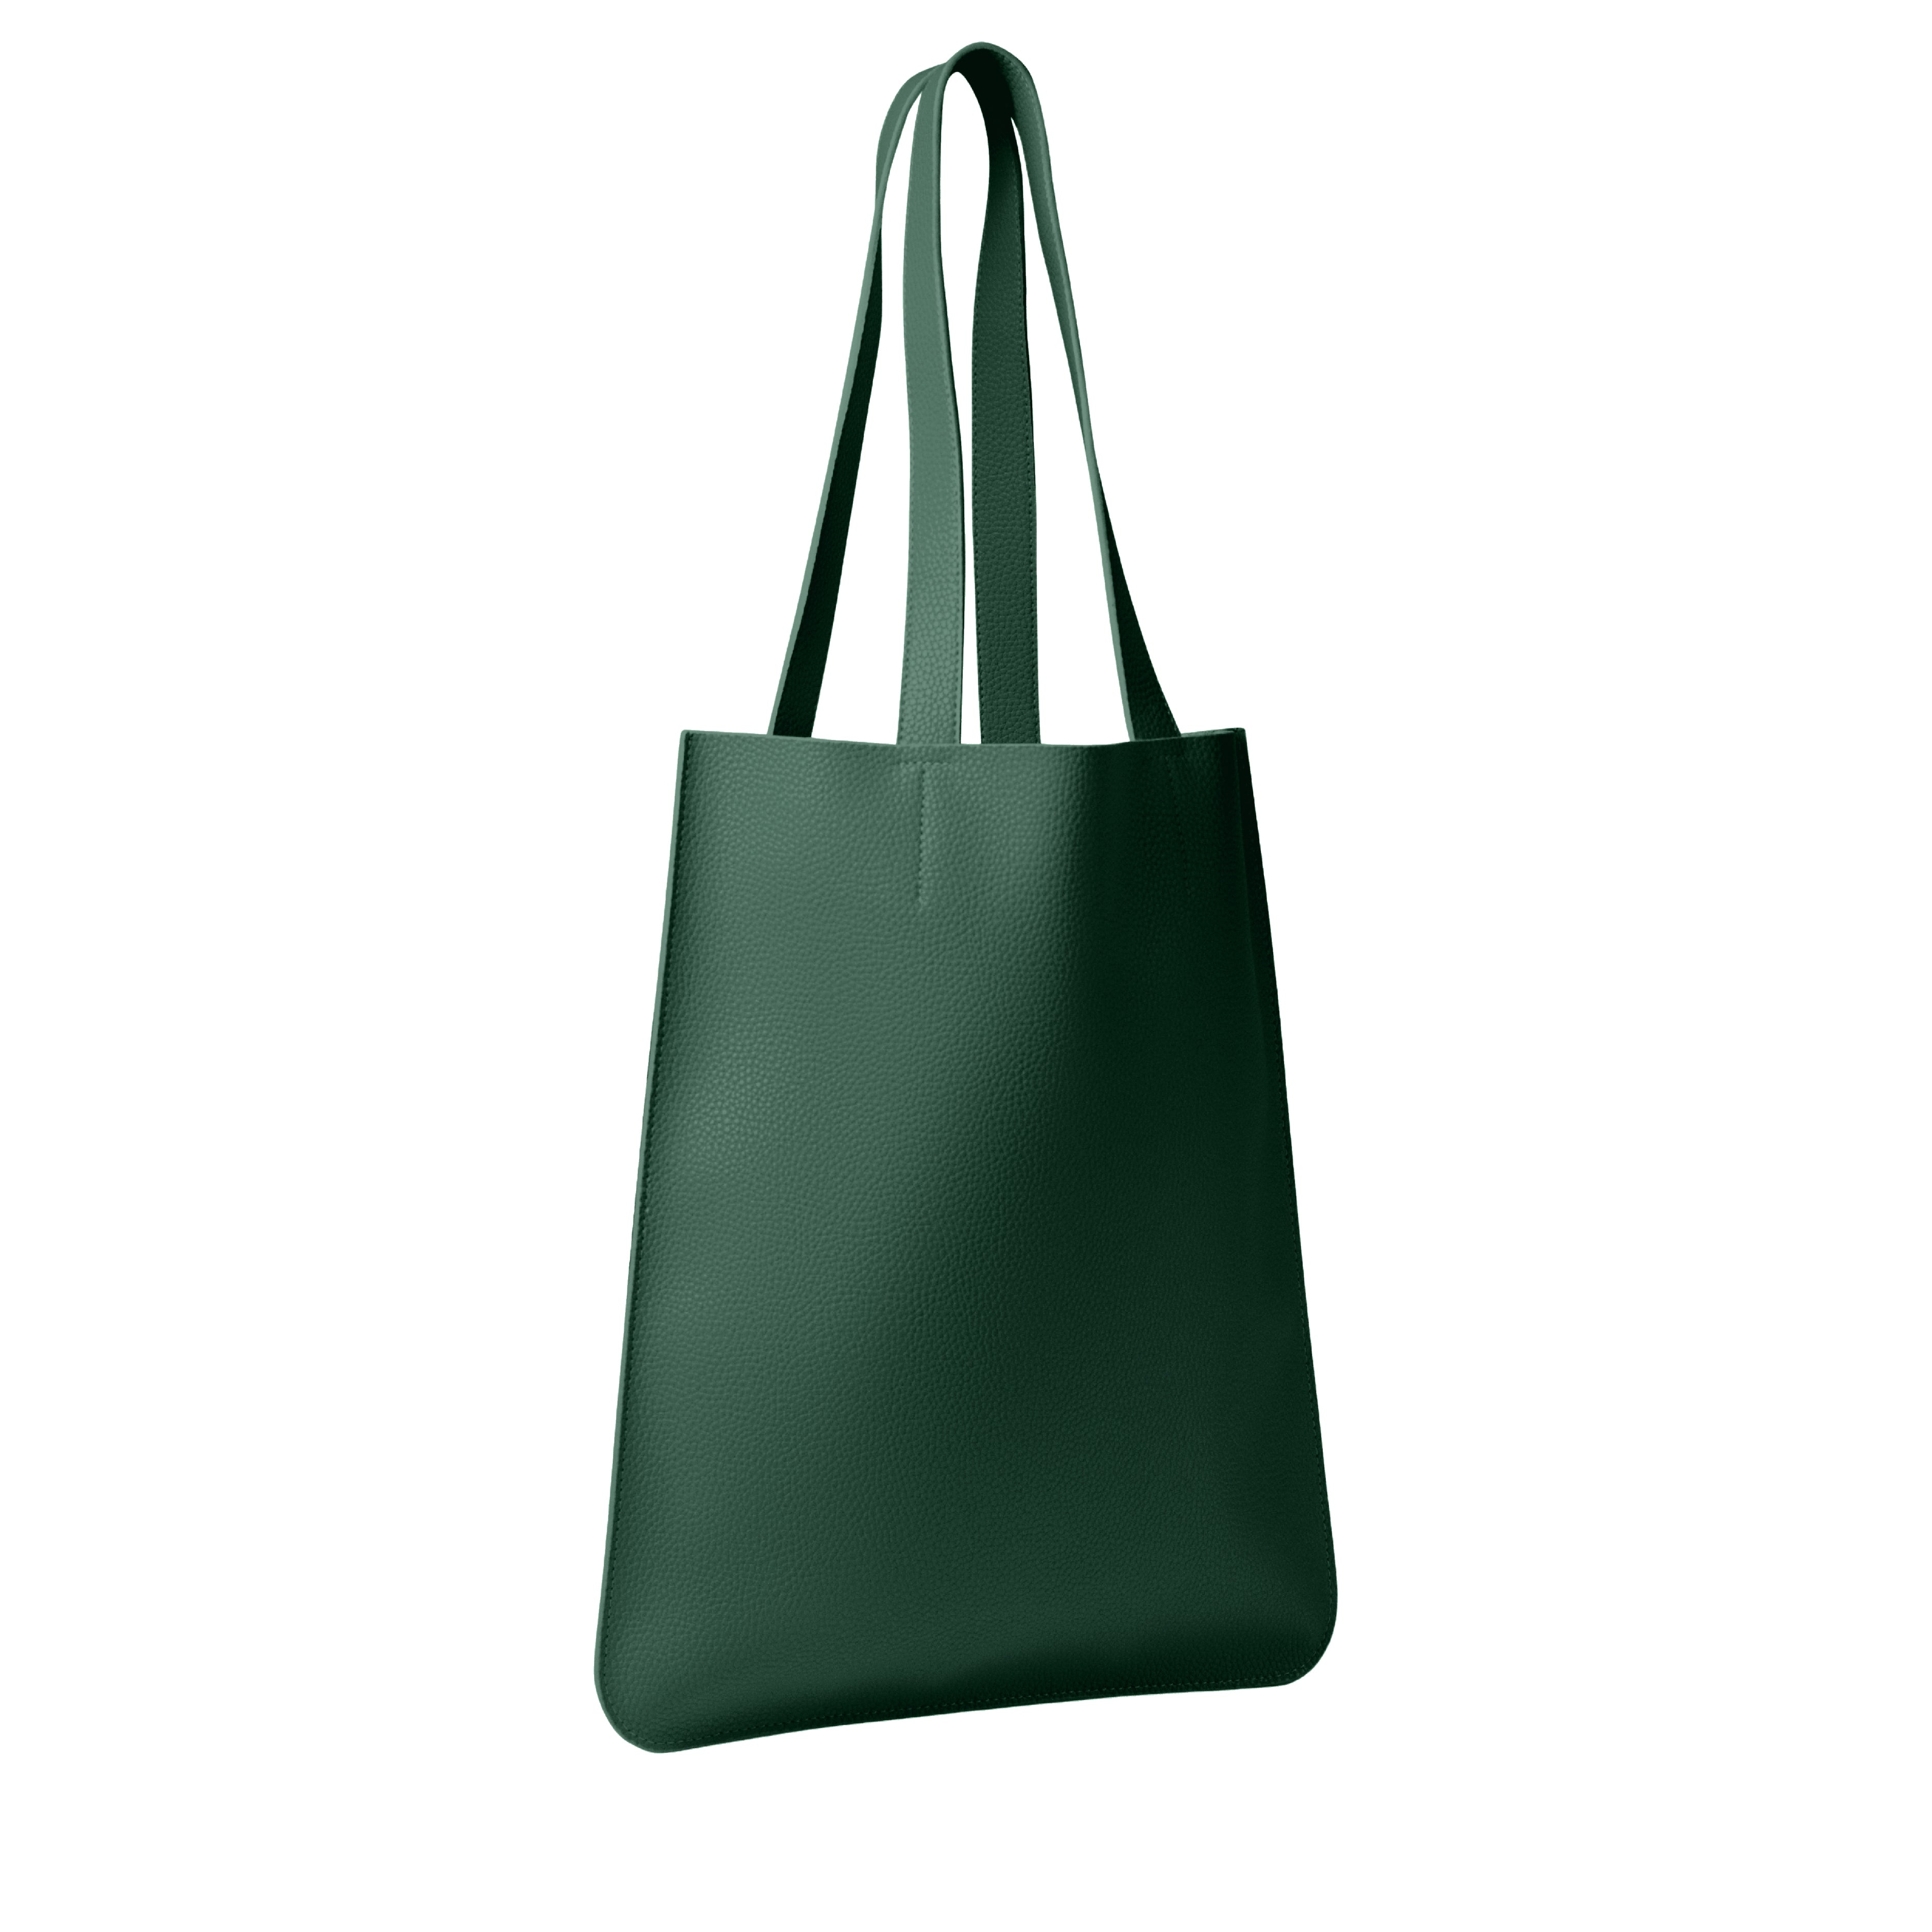 East Tote in Pine Green side angle